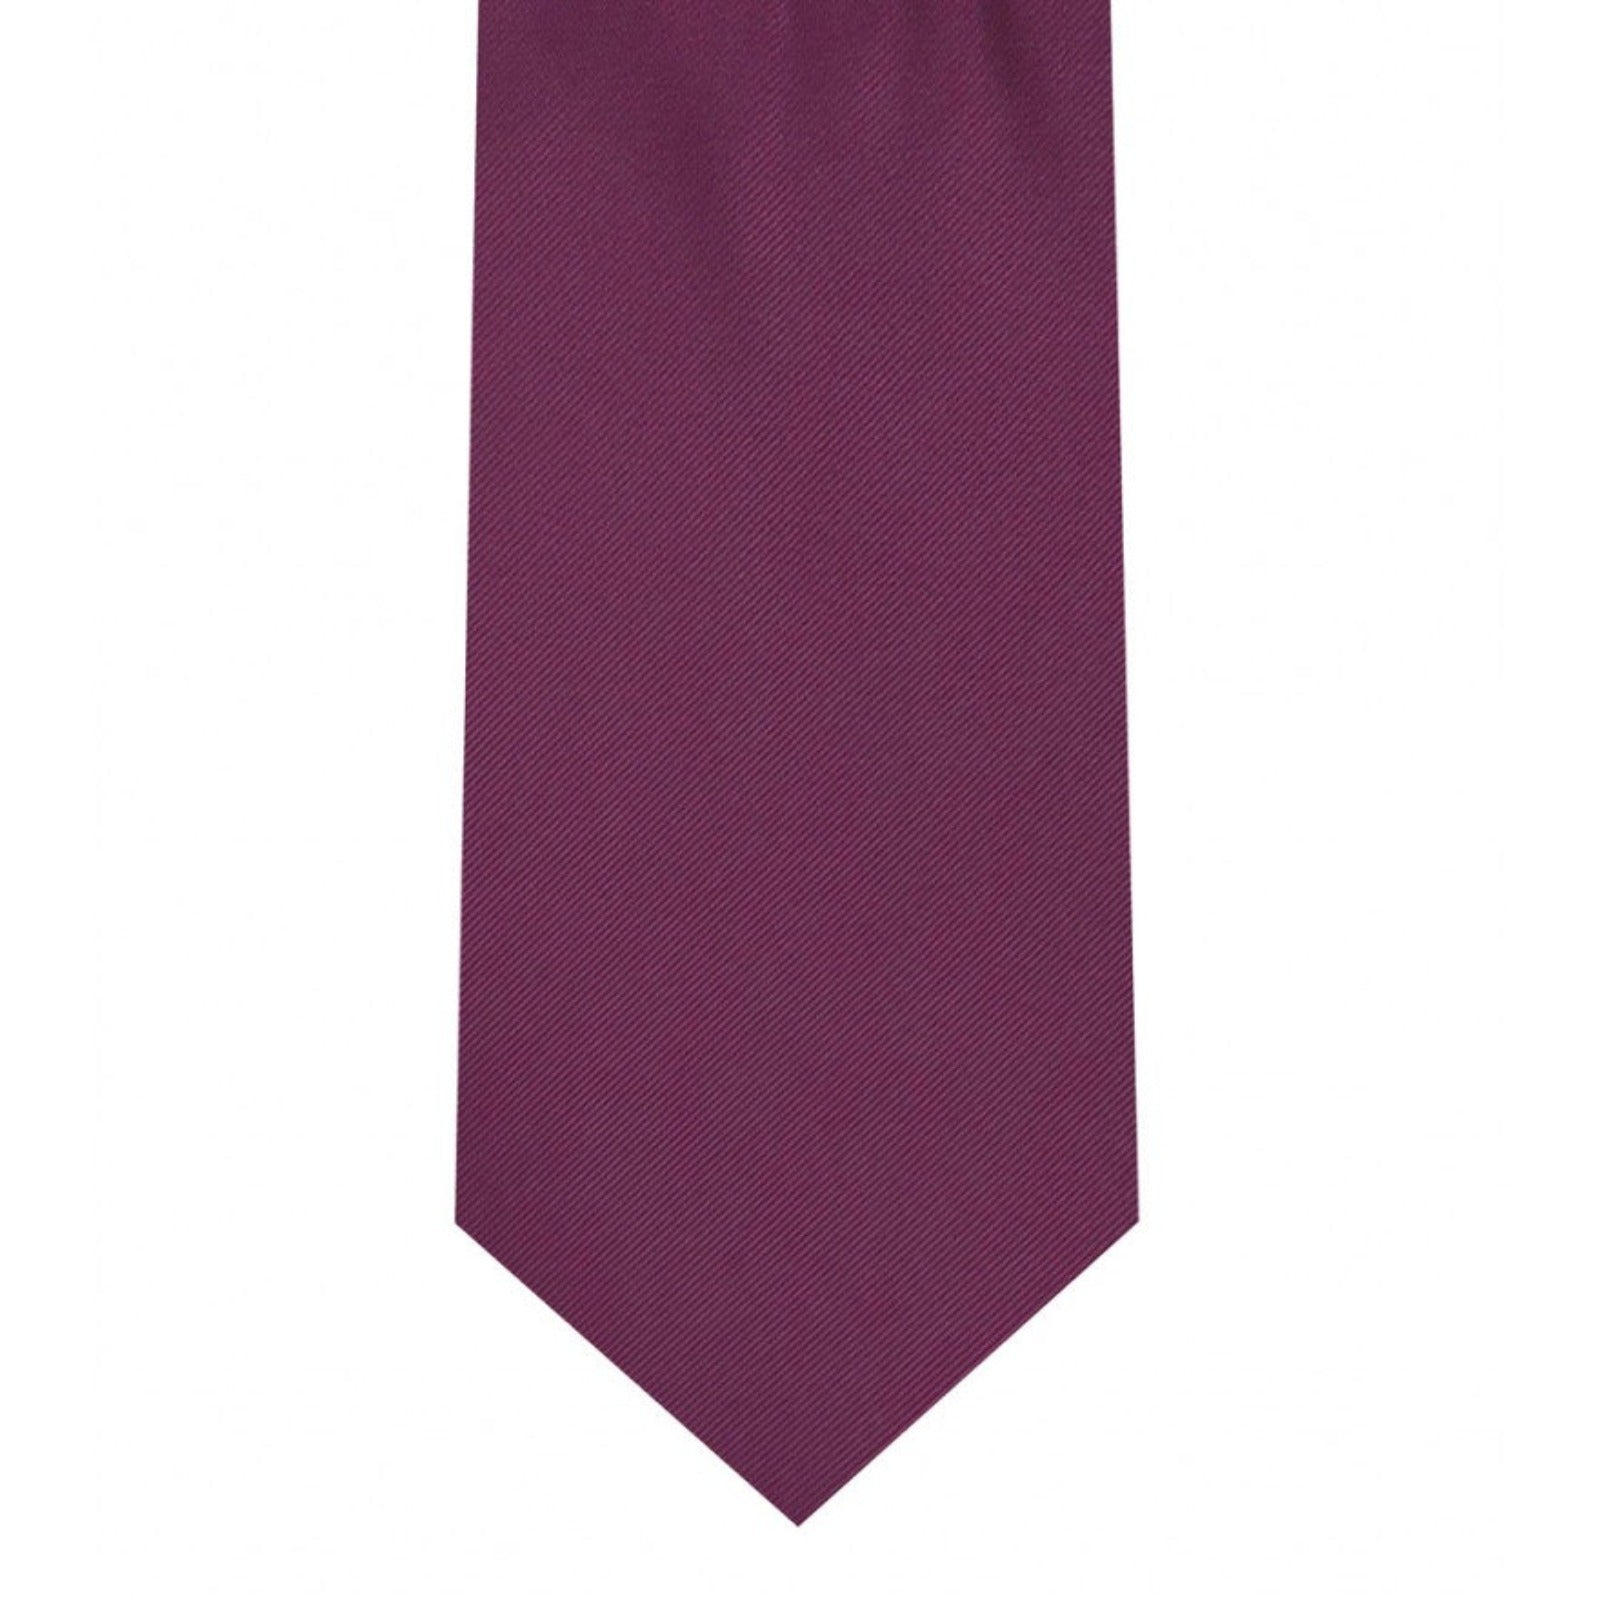 Classic Magenta Tie Skinny width 2.75 inches With Matching Pocket Square | KCT Menswear 